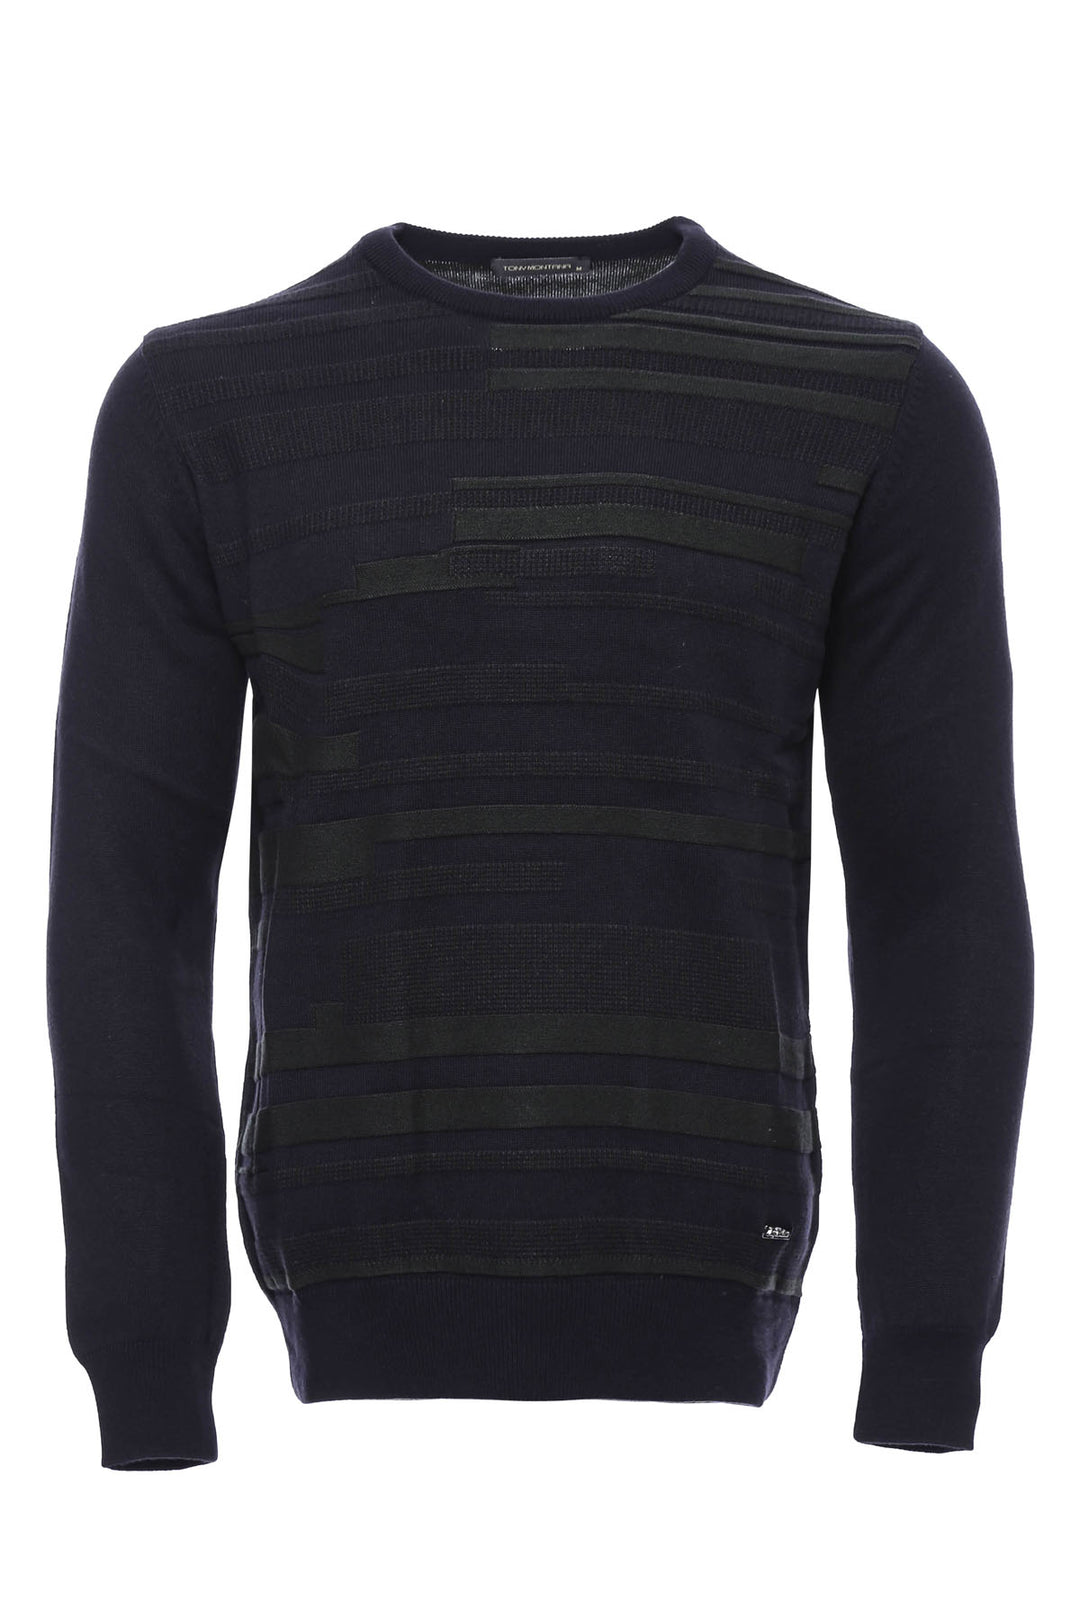 Navy Chest Patterned Circle Neck Sweater - Wessi